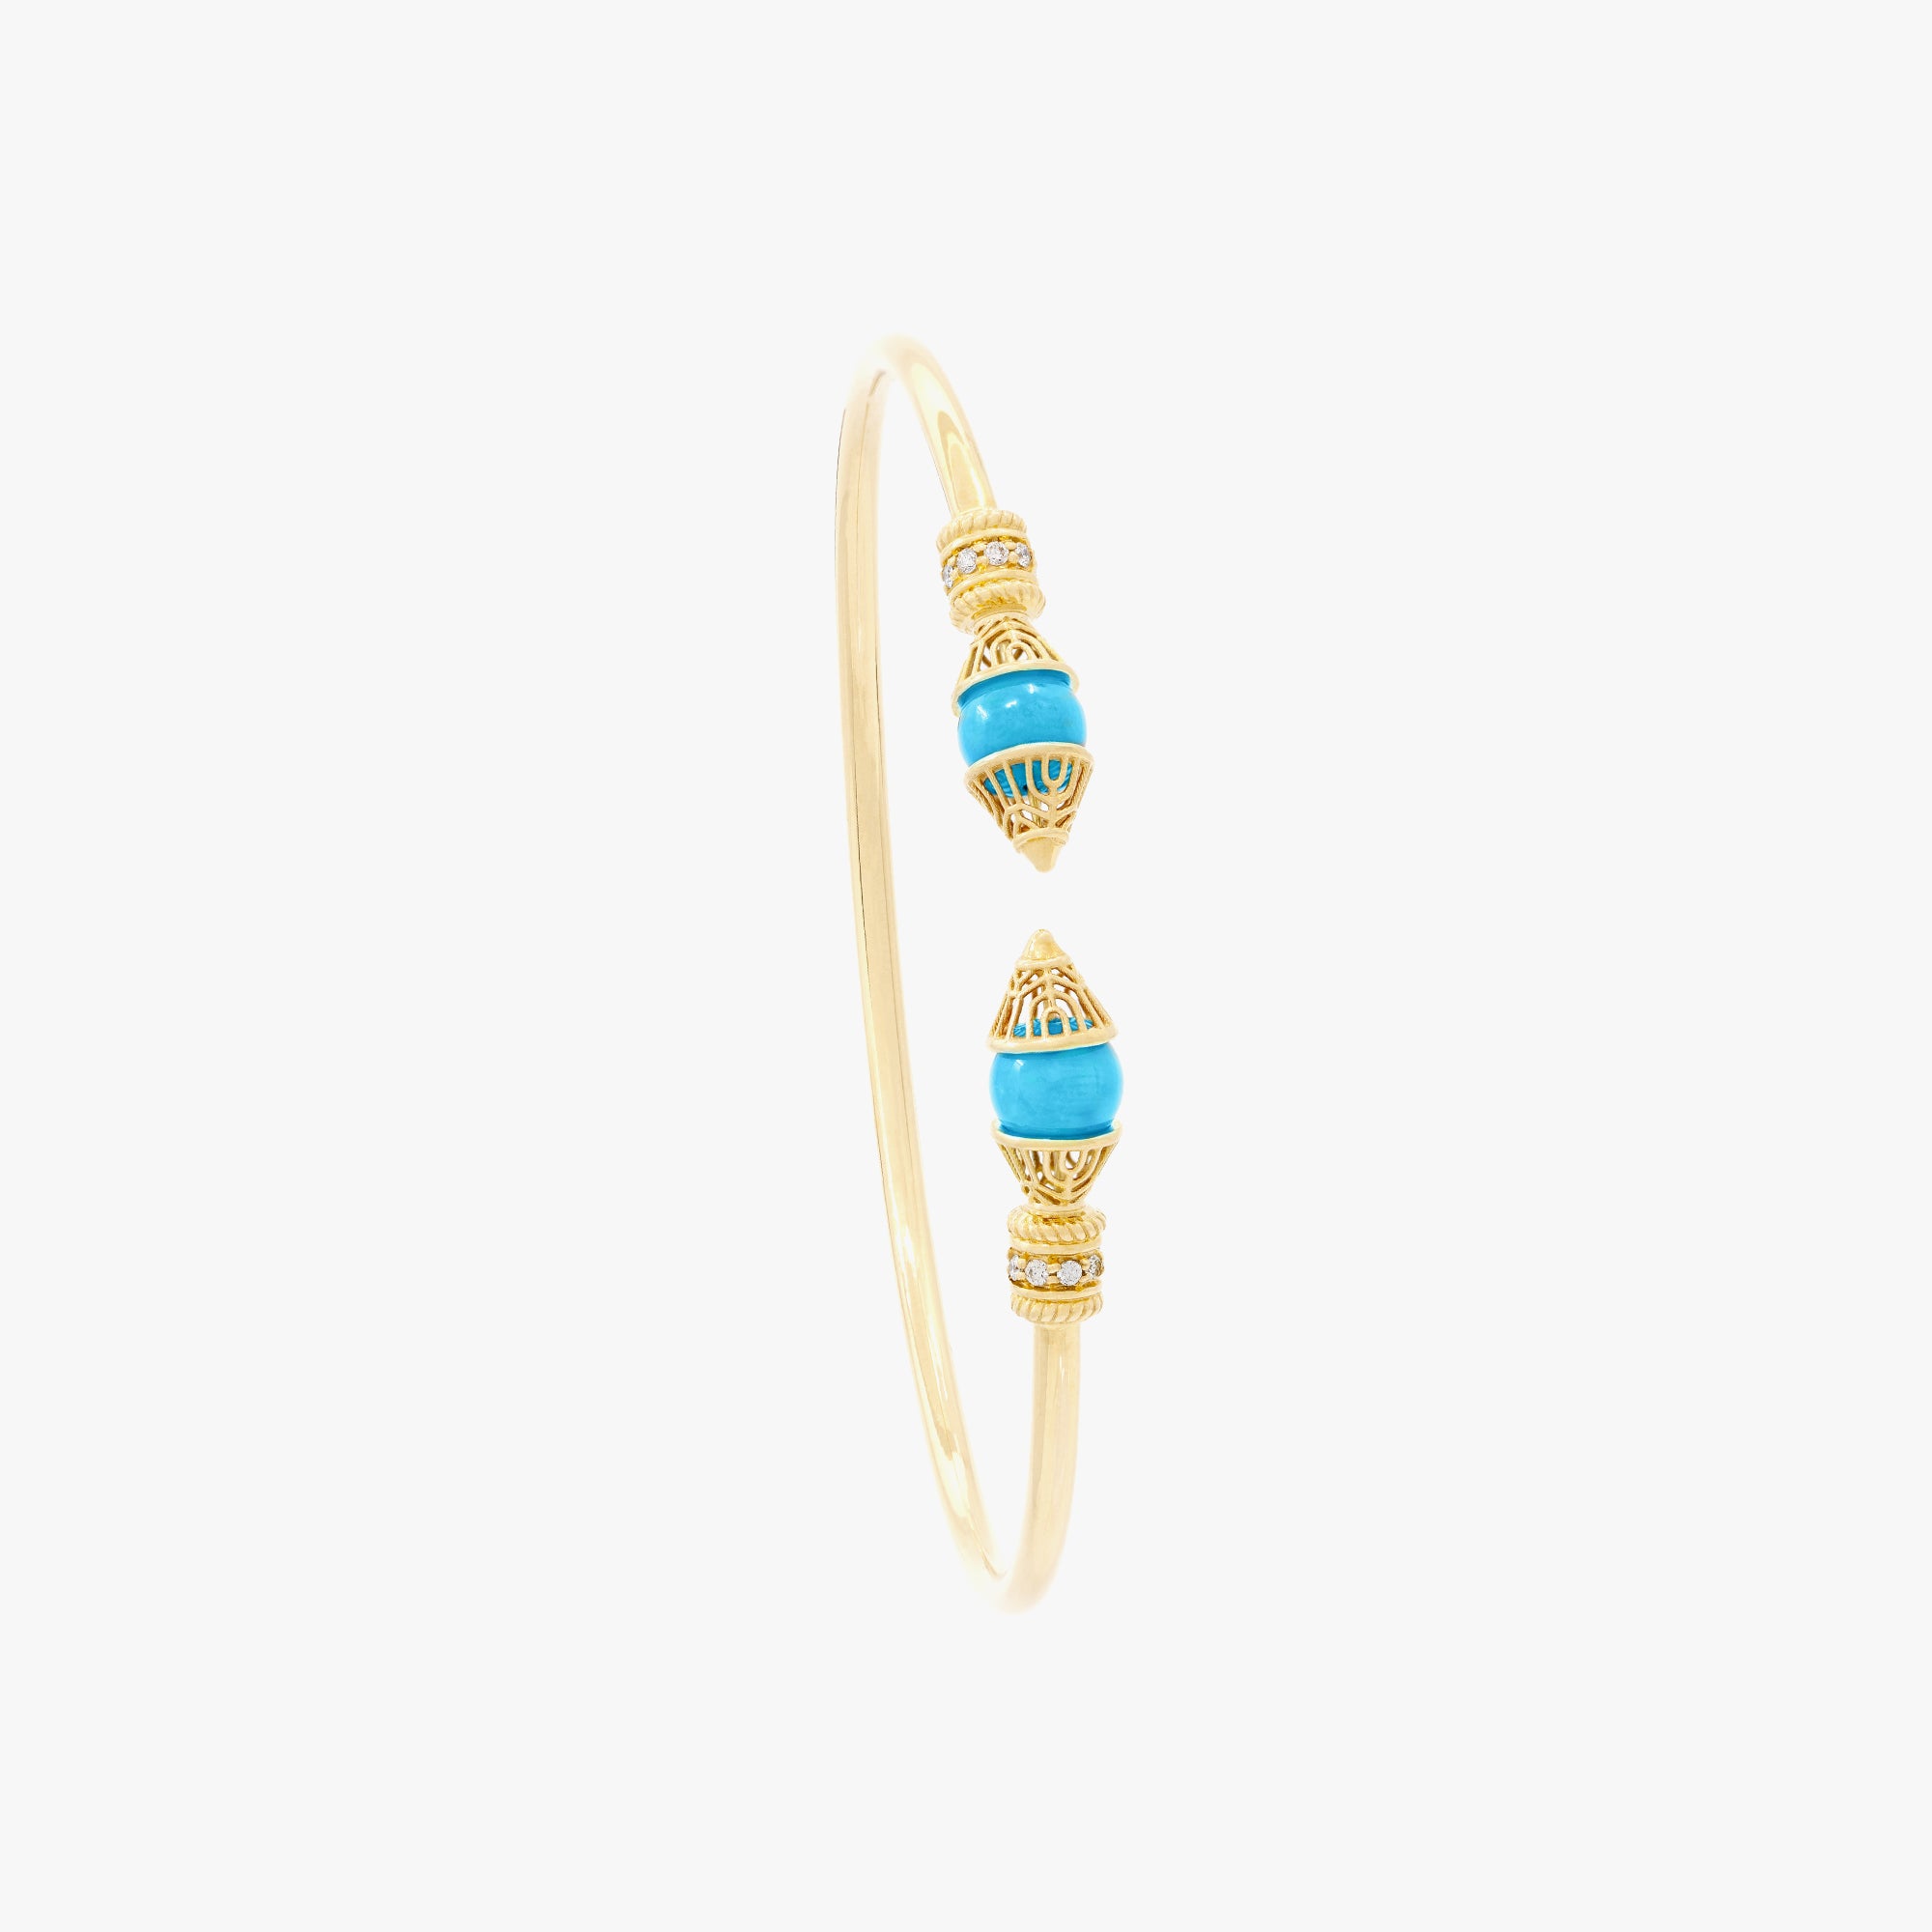 Al Merriyah Mood Colour Bangle in 18k Yellow gold with Turquoise and Diamonds